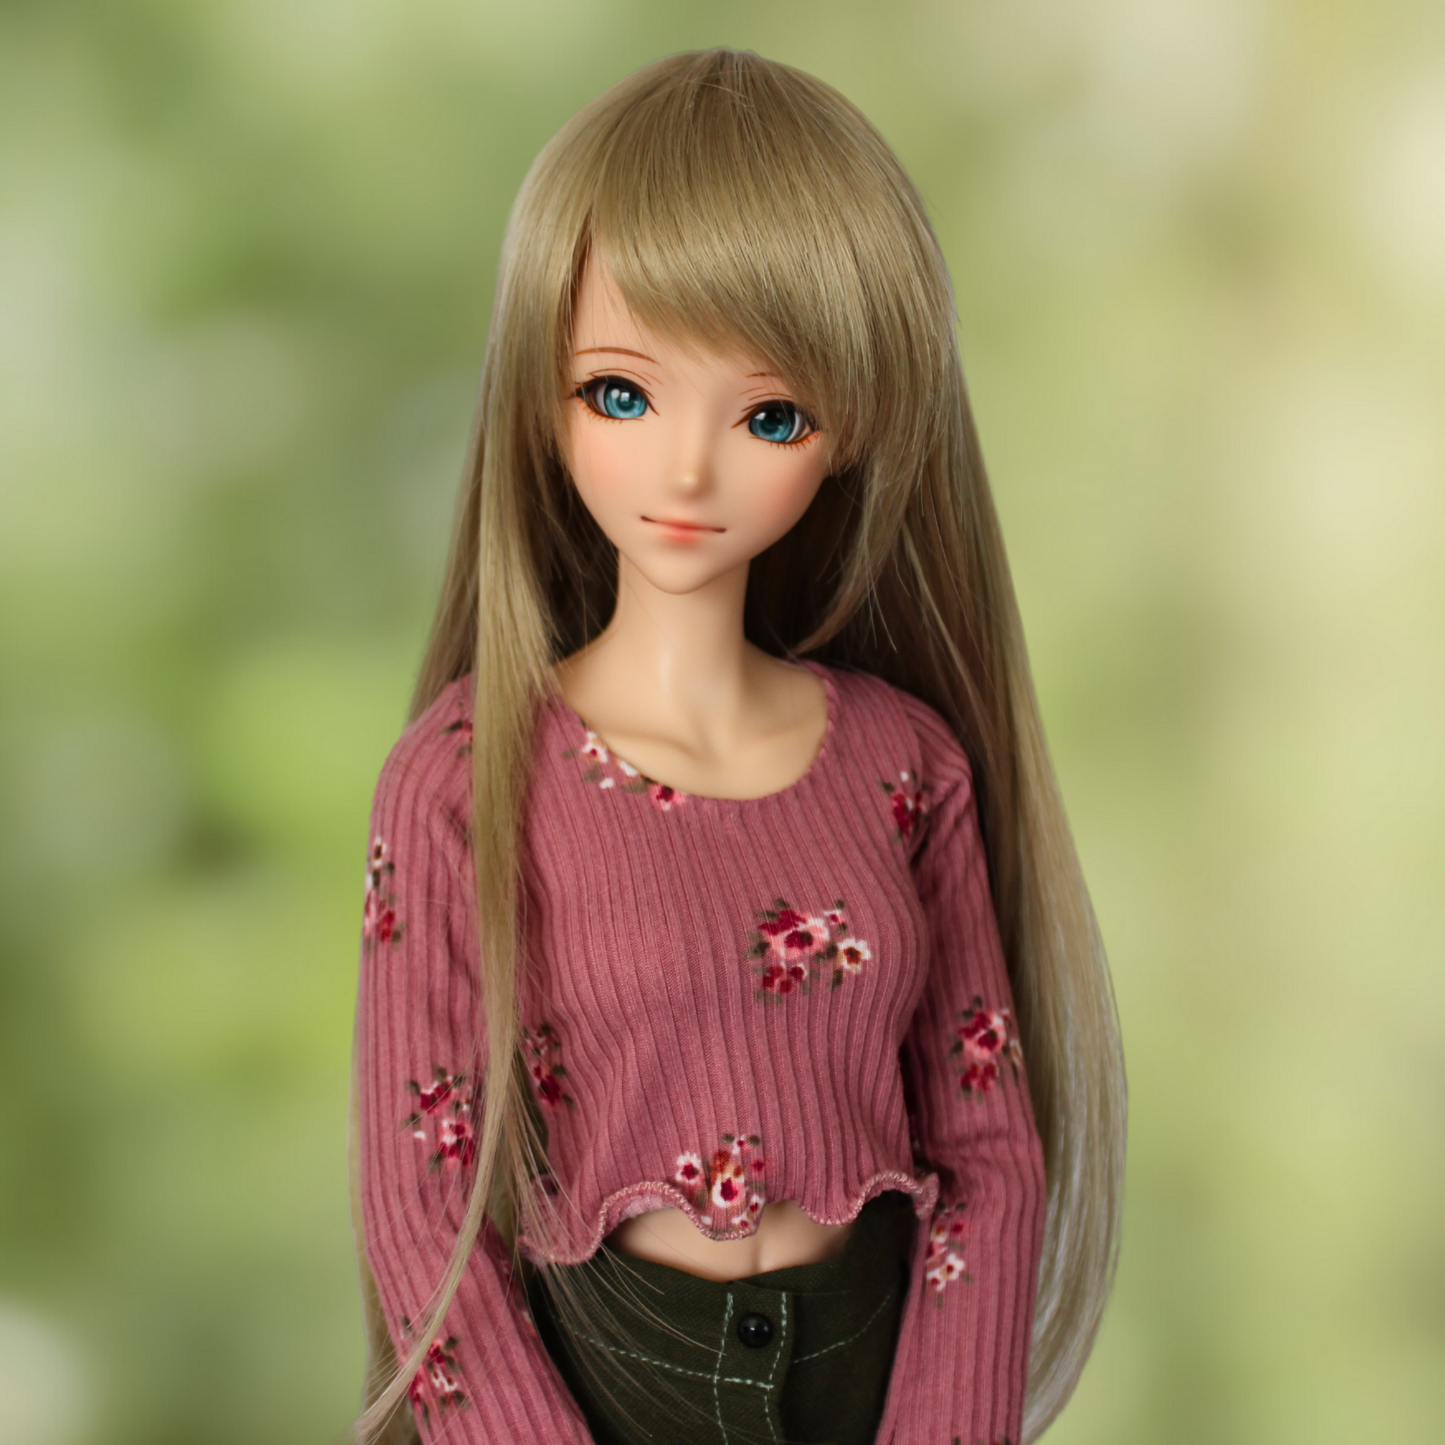 Pink Floral Blouse and Button-Down Skirt Set - The Doll Fairy